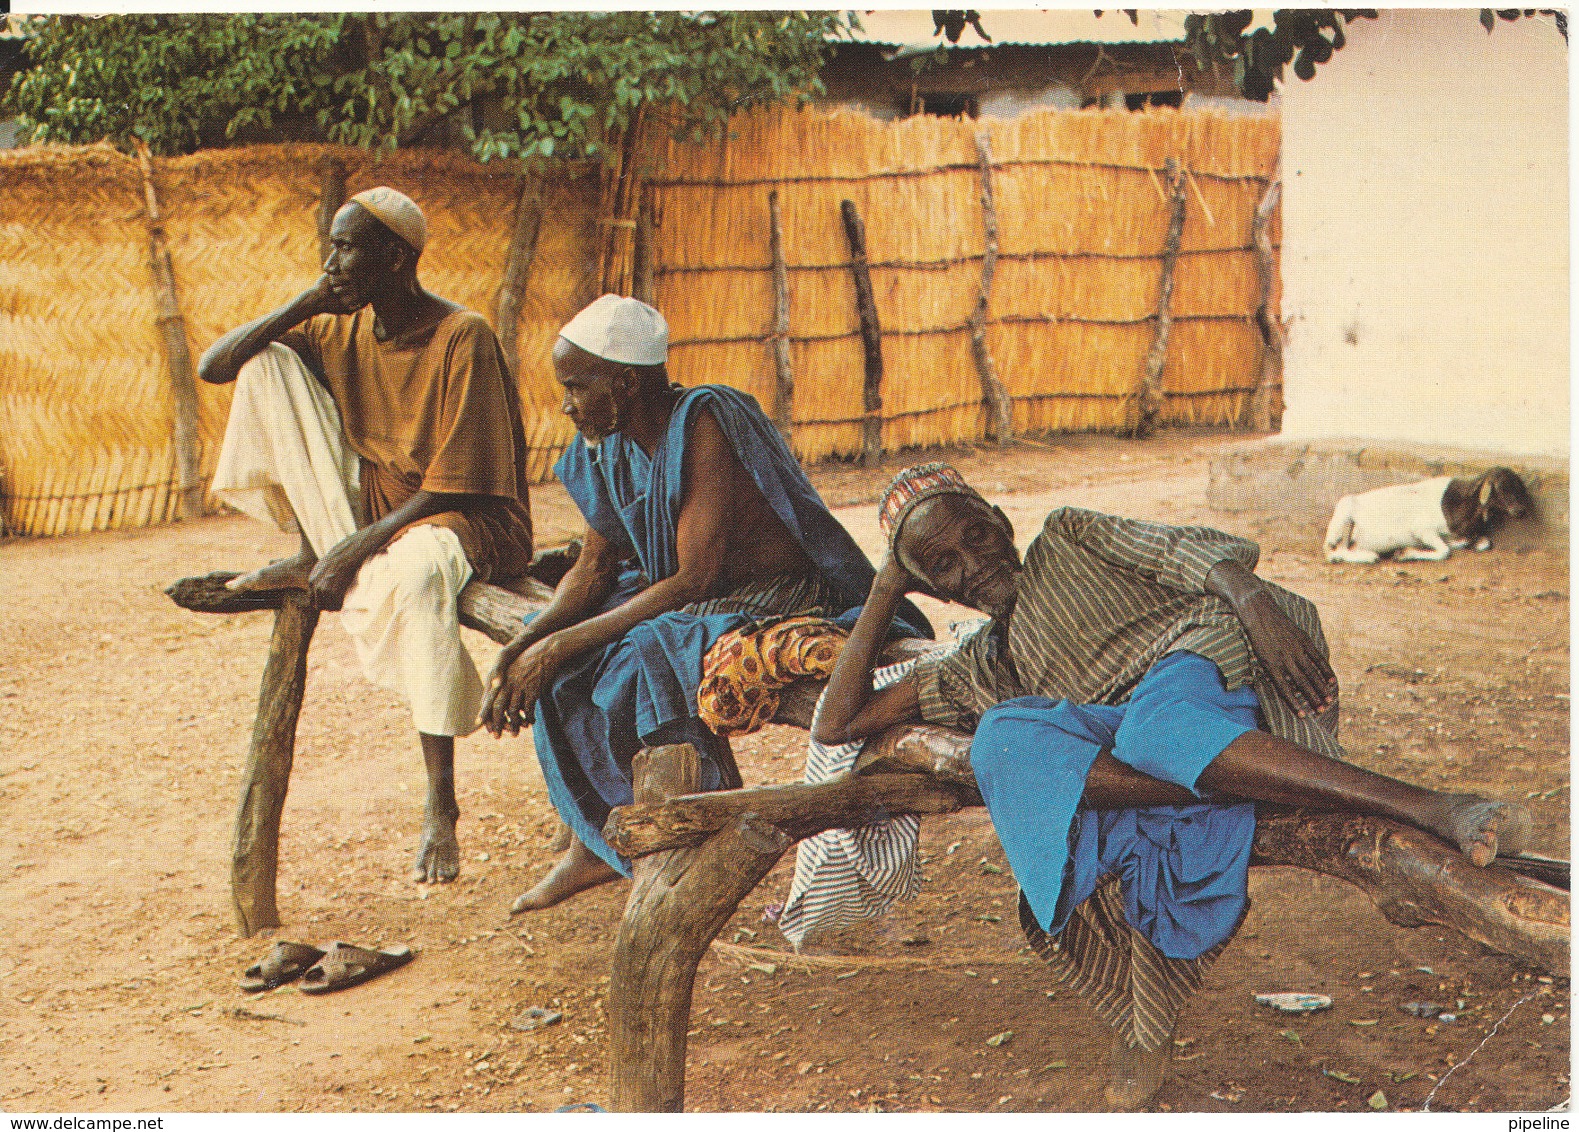 Gambia Postcard Sent To Denmark 27-2-1979 WWF Stamp (Gambian Elders Rest On The Bantaba) - Gambia